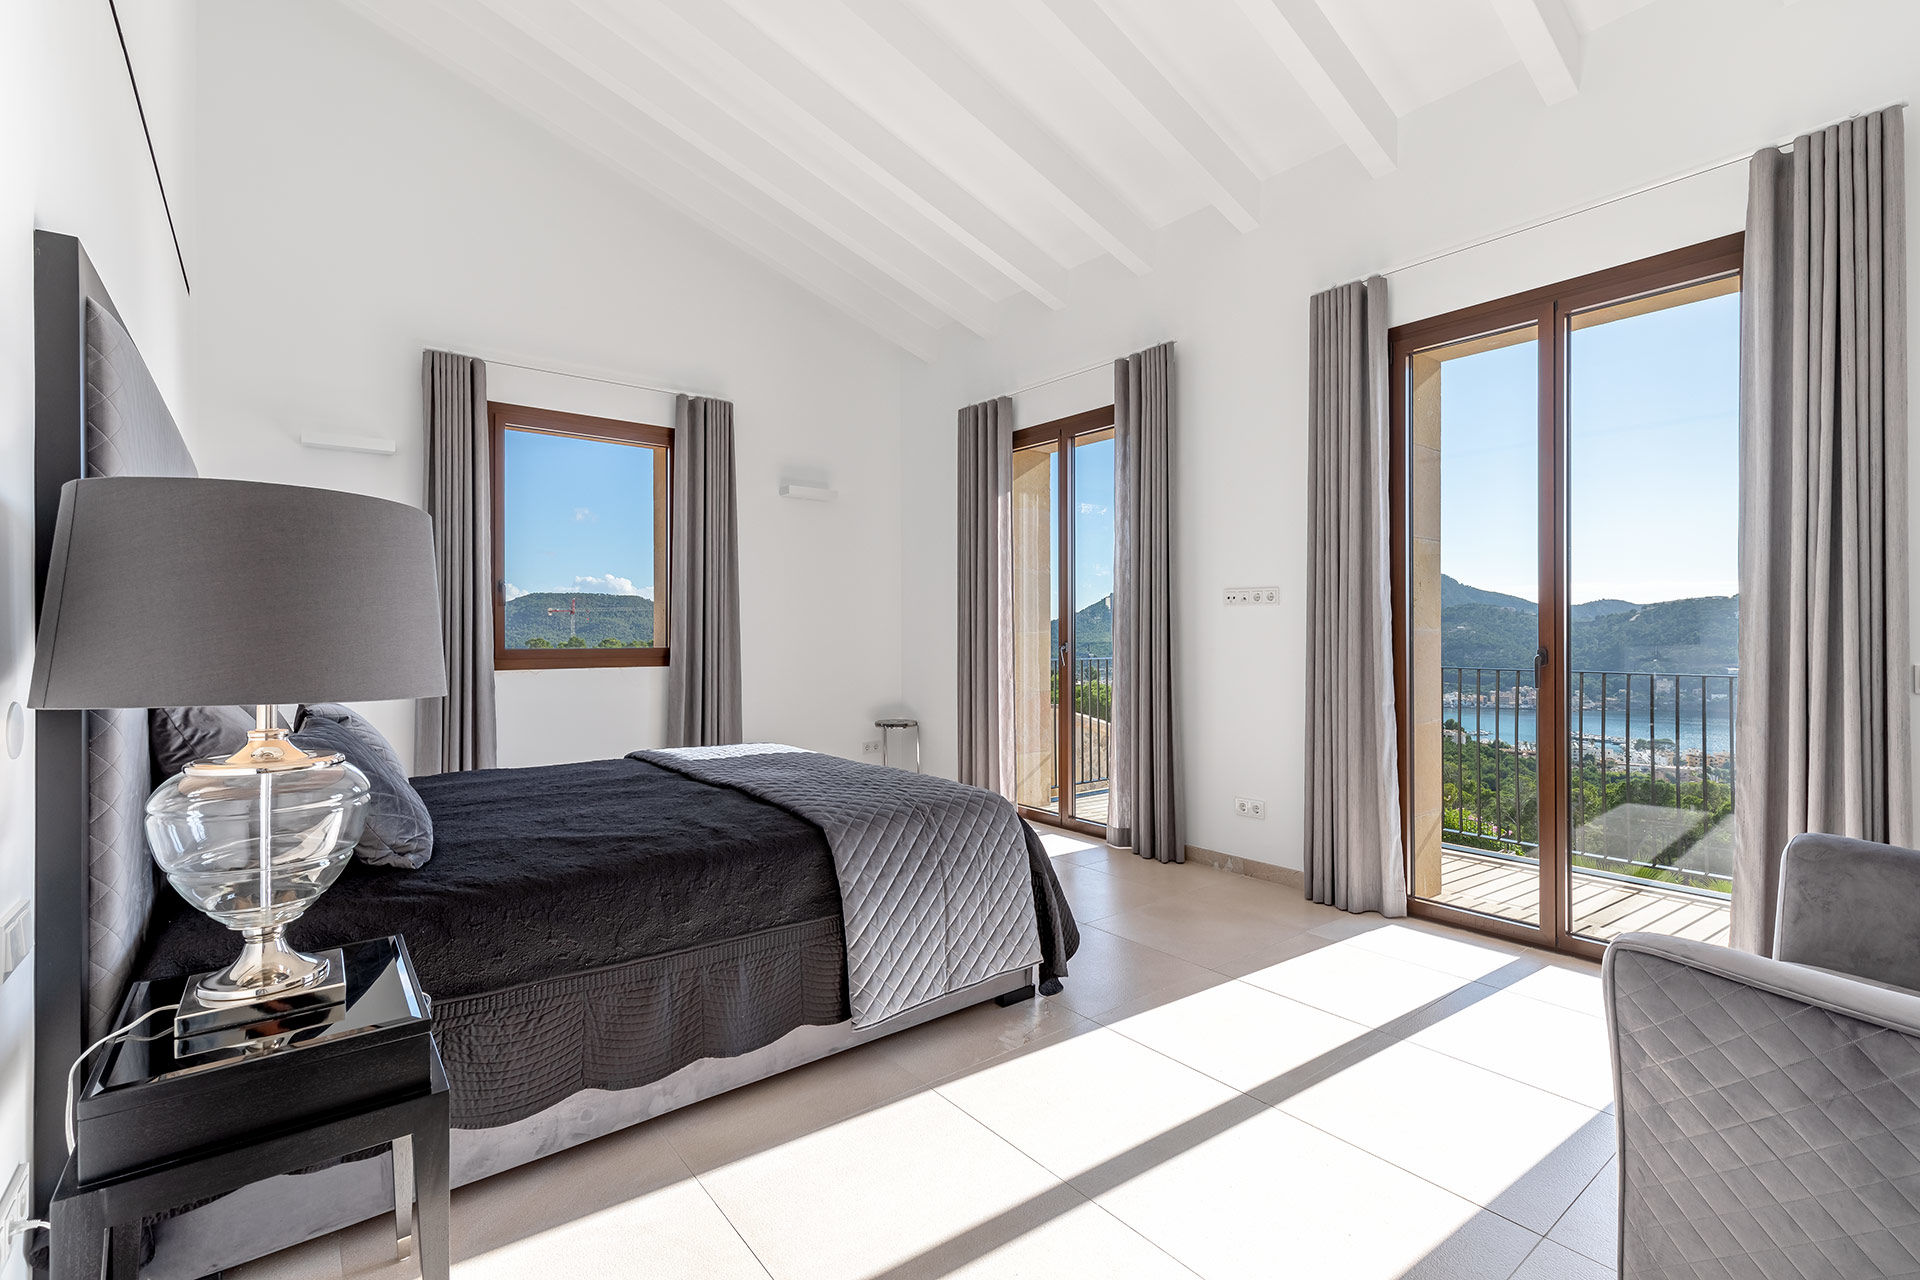 Unique luxurious property in prime location with sea view - Bedroom 2